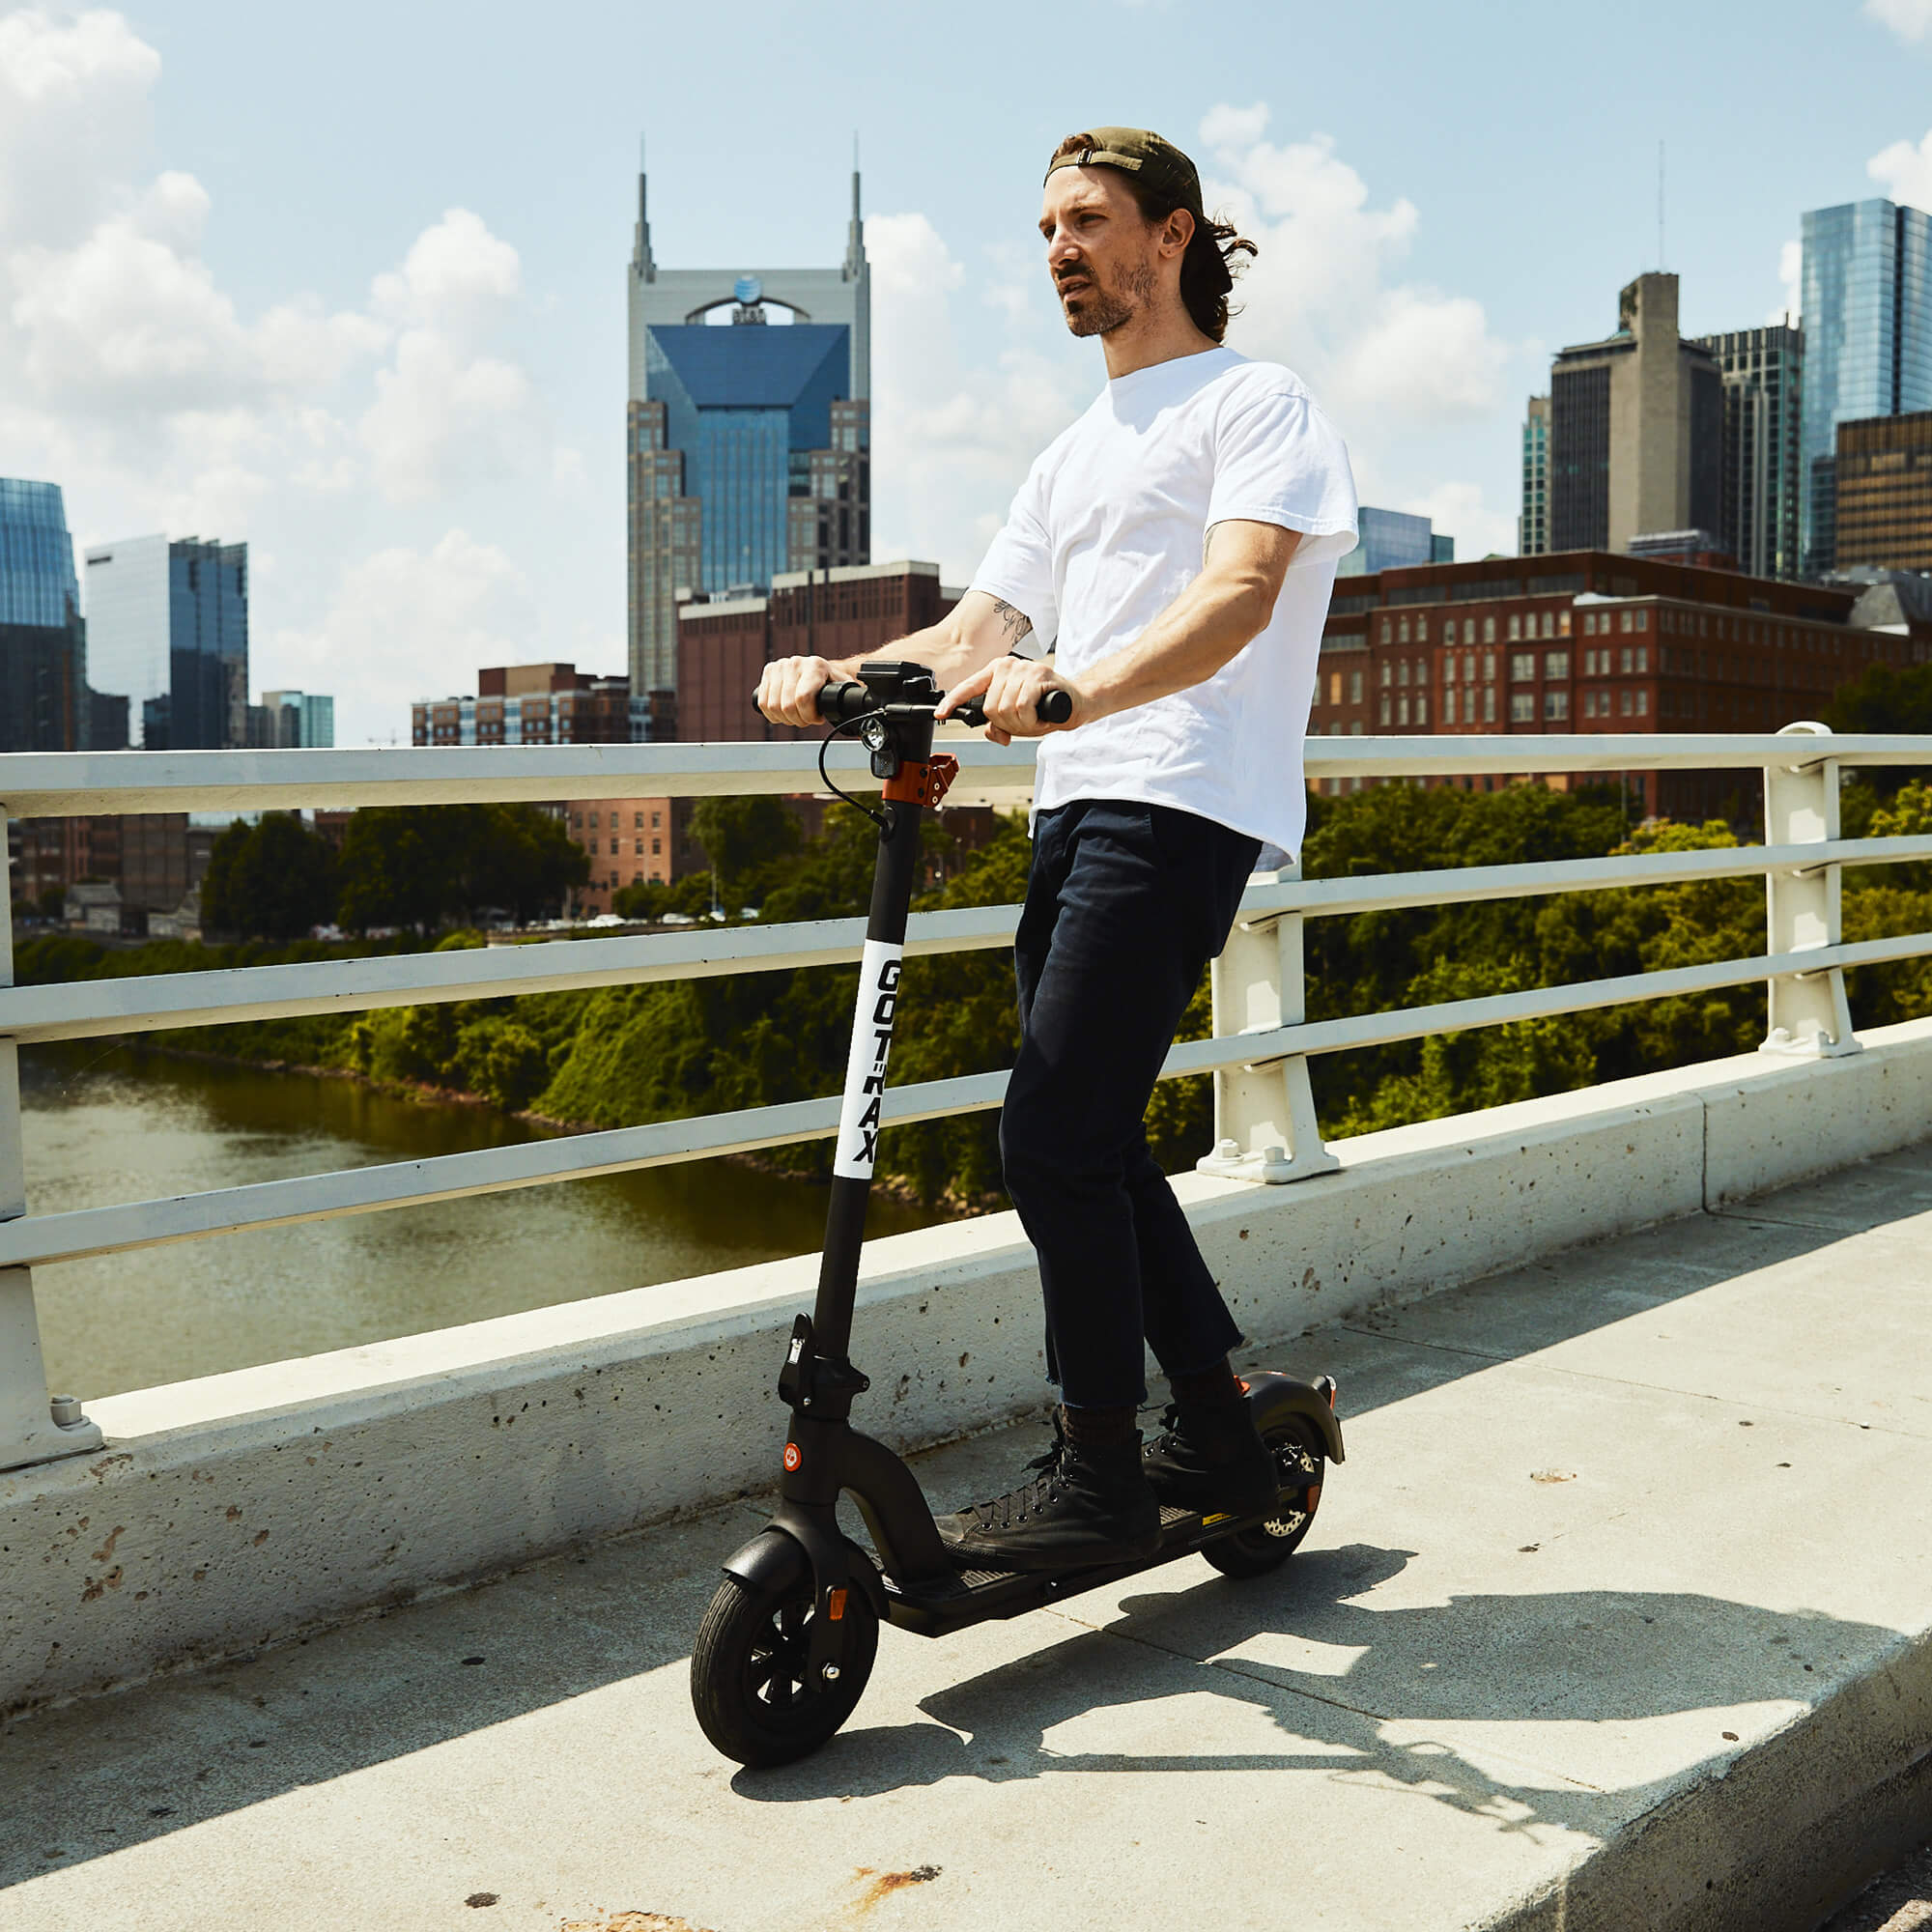 G4 Electric Scooter - GOTRAX